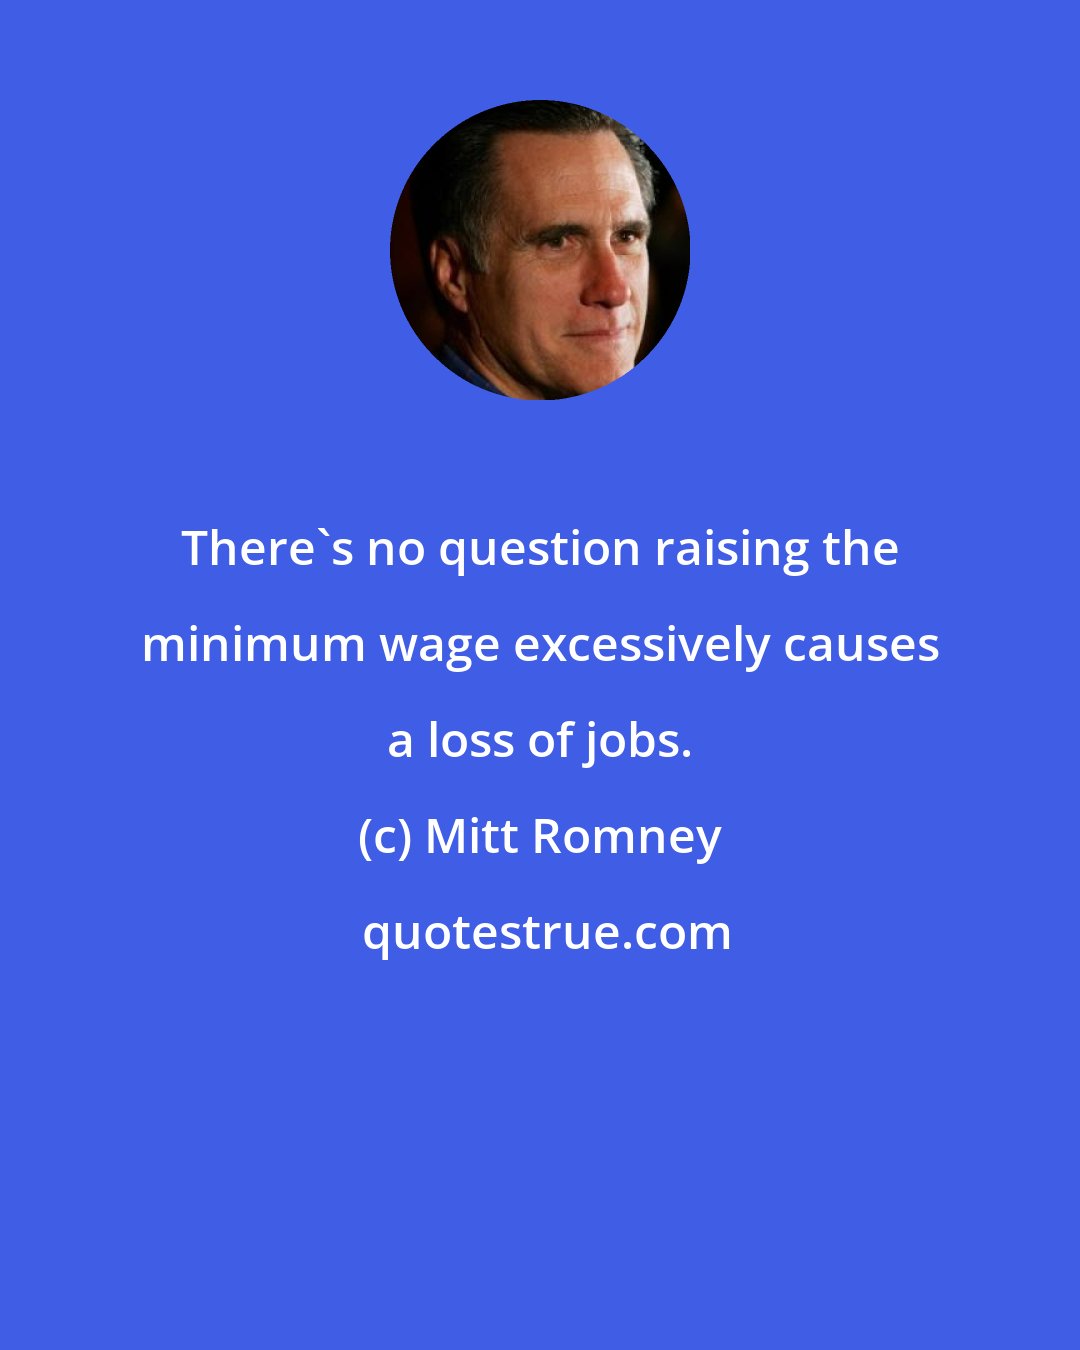 Mitt Romney: There's no question raising the minimum wage excessively causes a loss of jobs.